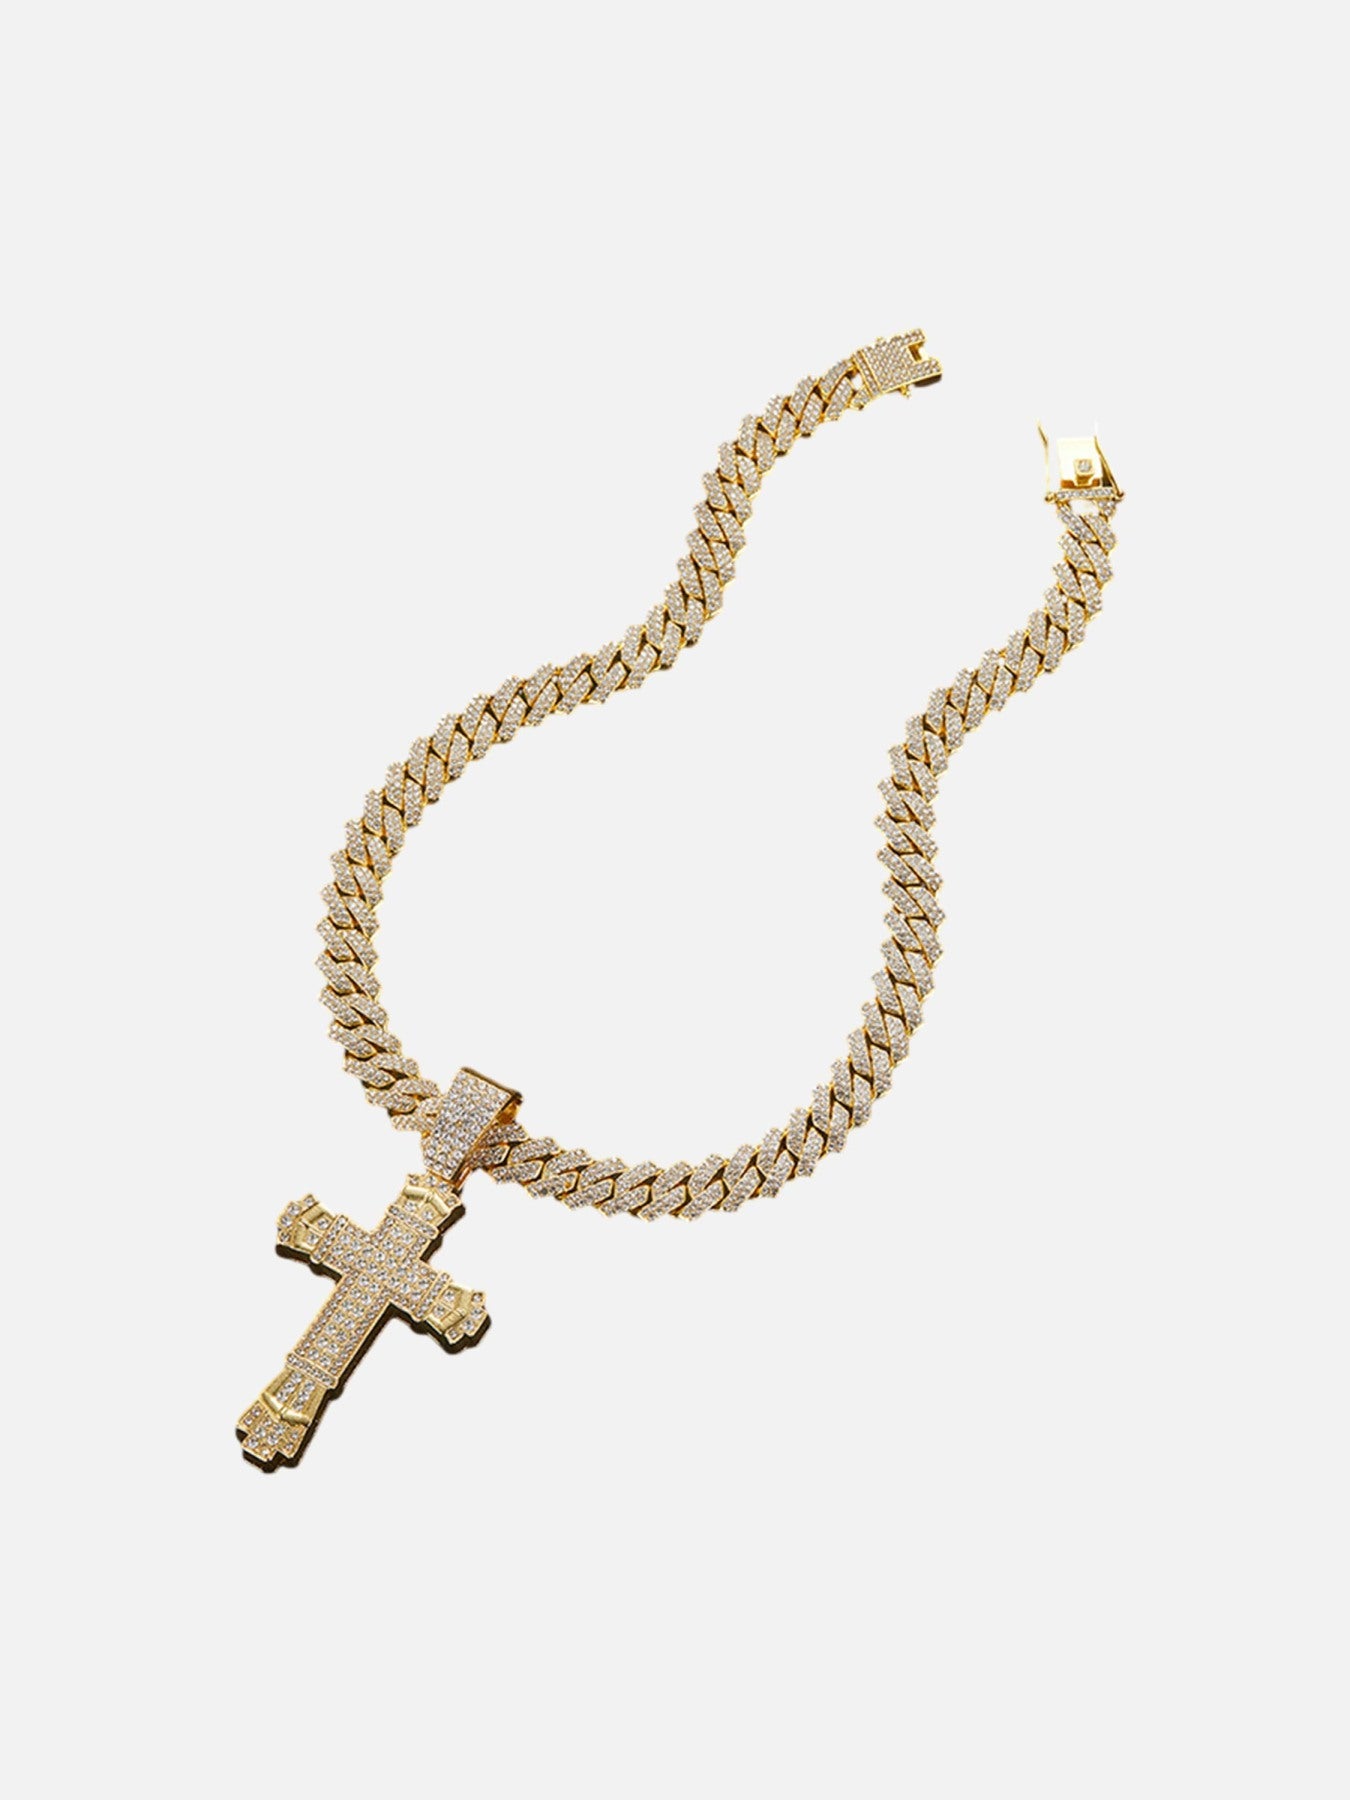 The Supermade Diamond Large Cross Necklace